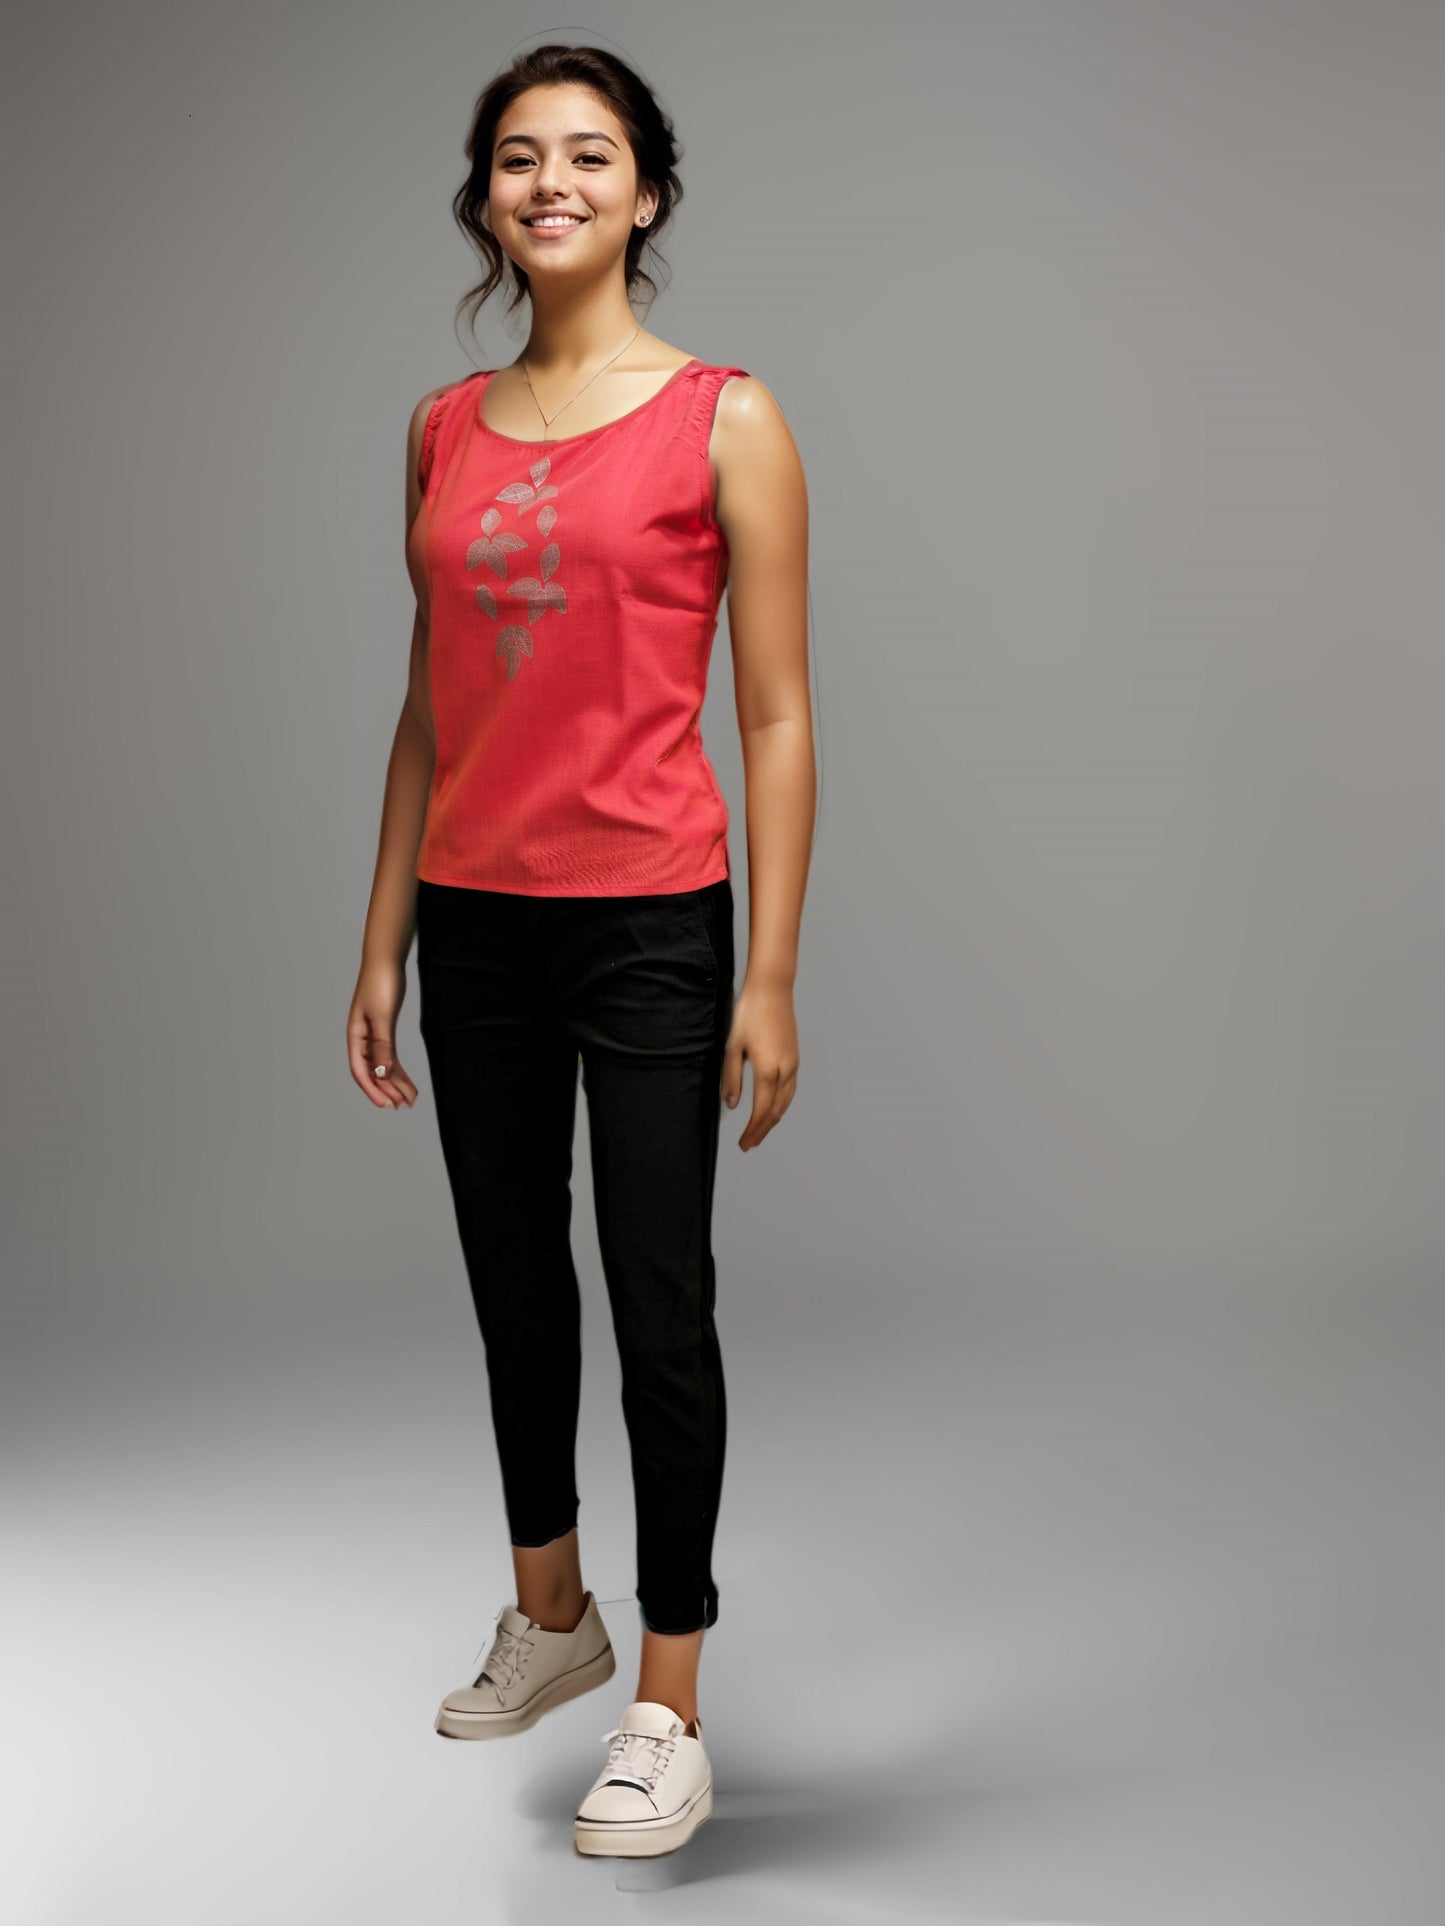 Aabandh's Sleevless Top - Parn ( Ruby Cotton )